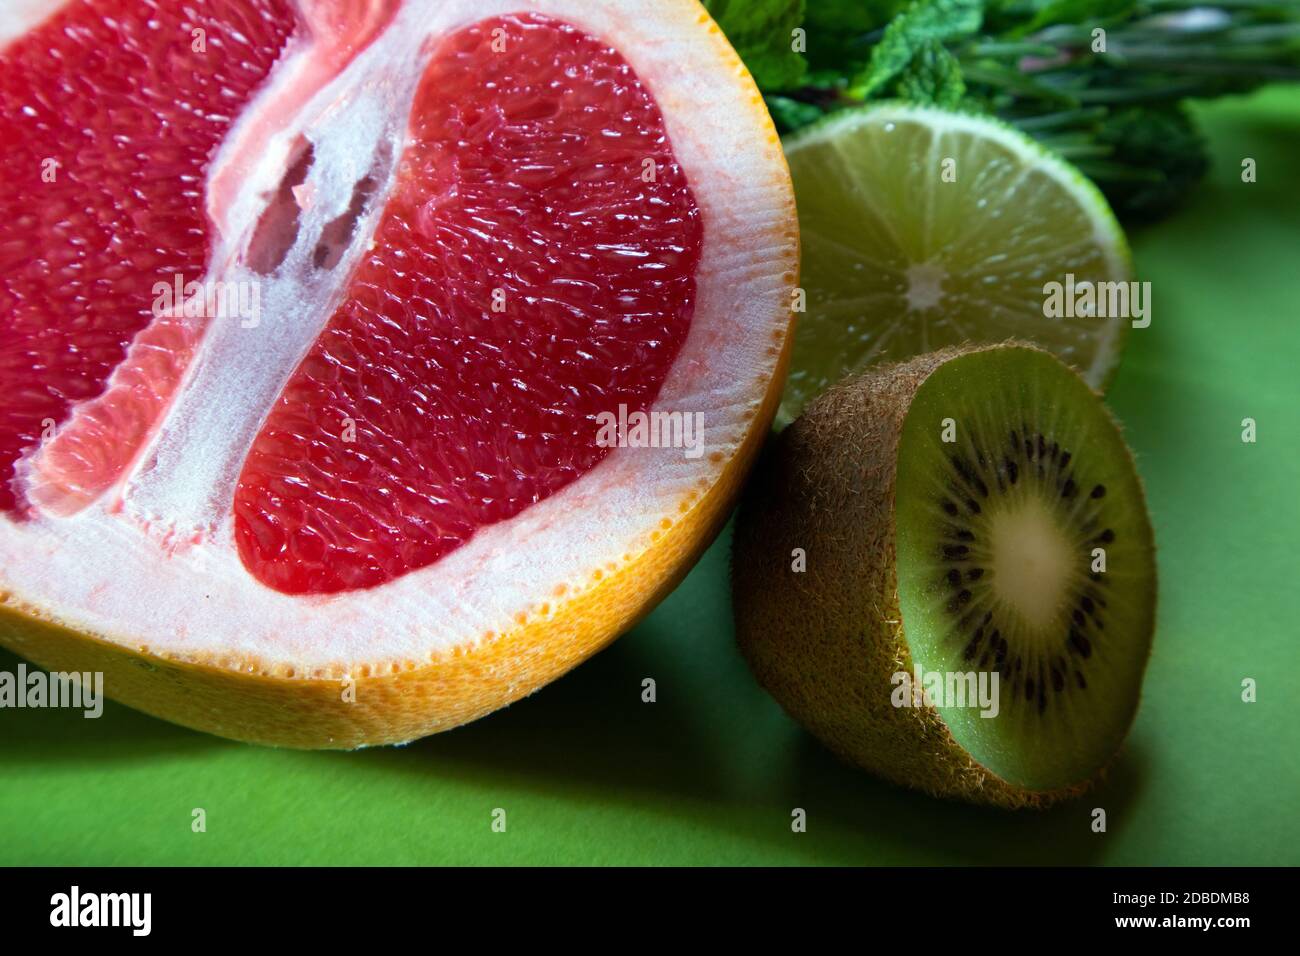 Fruit composition of cut red orange, lime, kiwi and verdure on a light green background Stock Photo